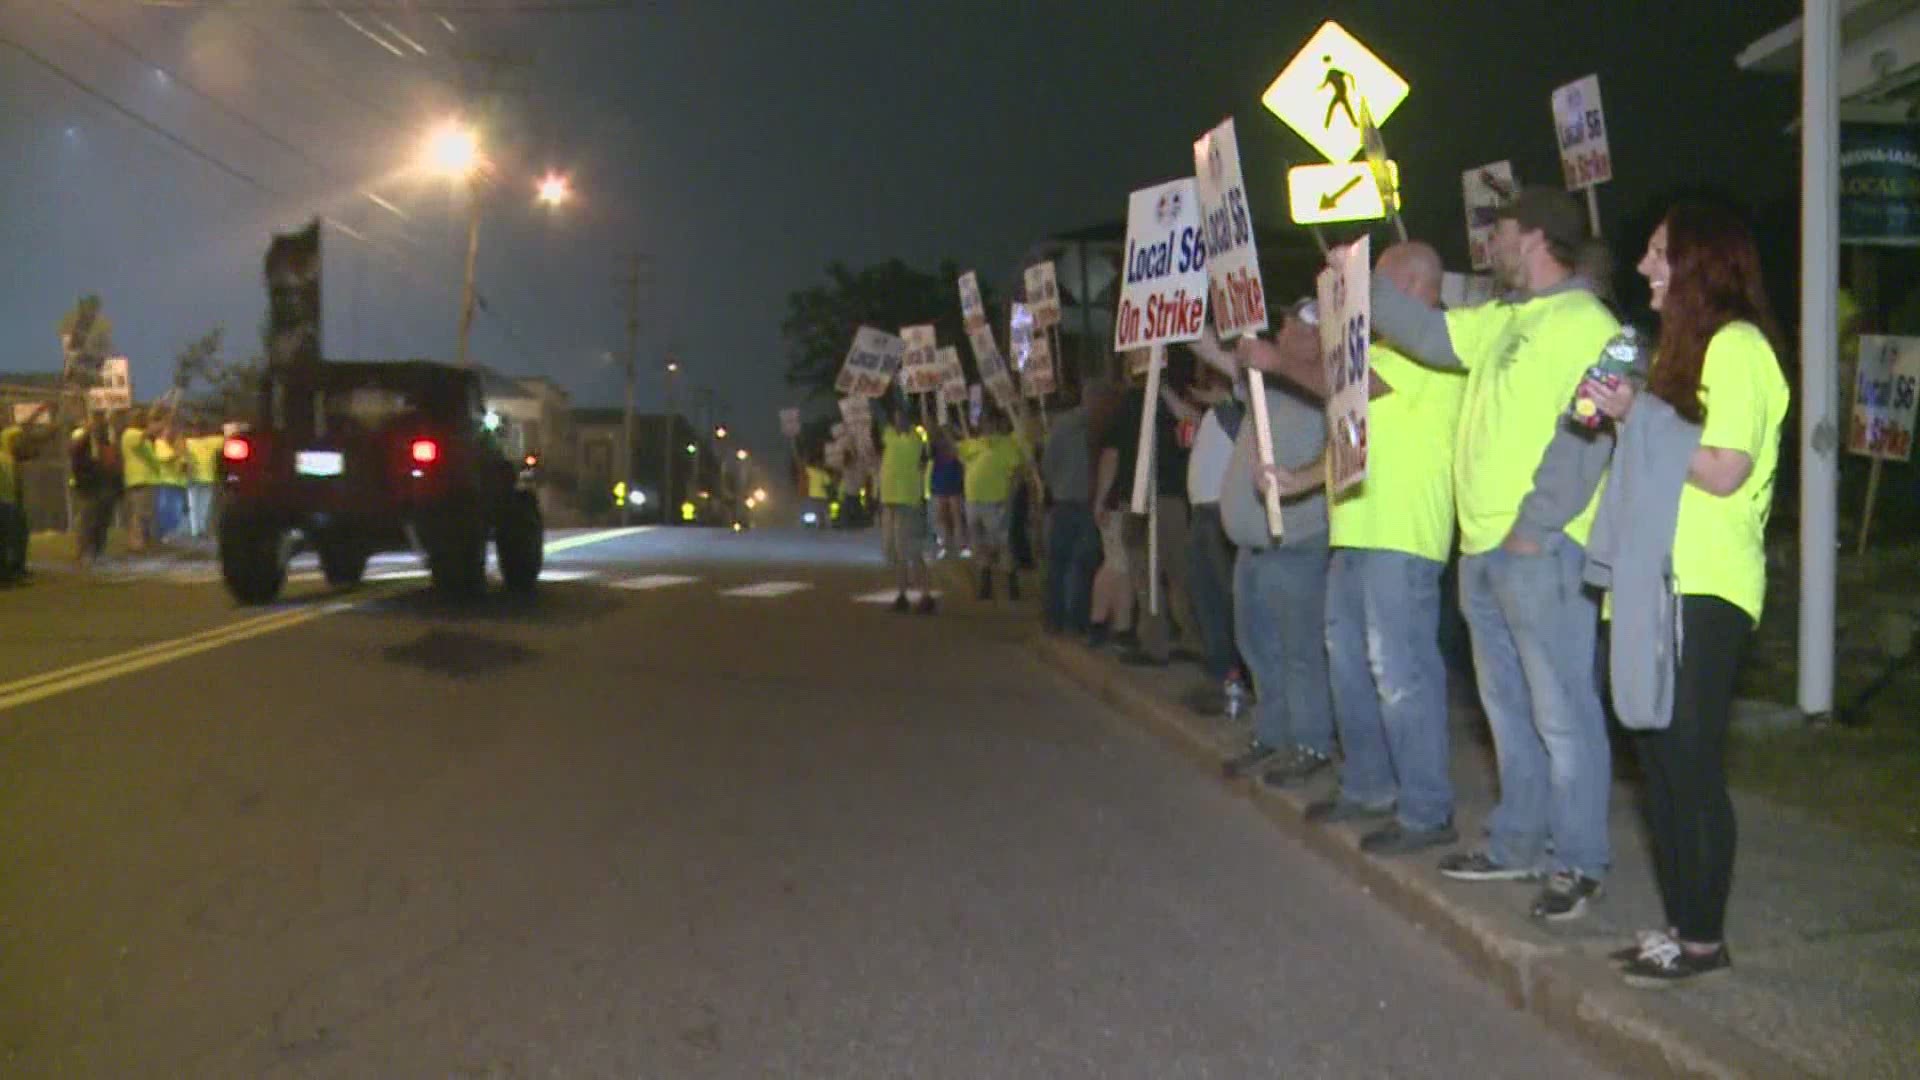 More than 4000 have been on strike since 12:01 A.M. Monday when the union's contract with Bath Iron Works ended